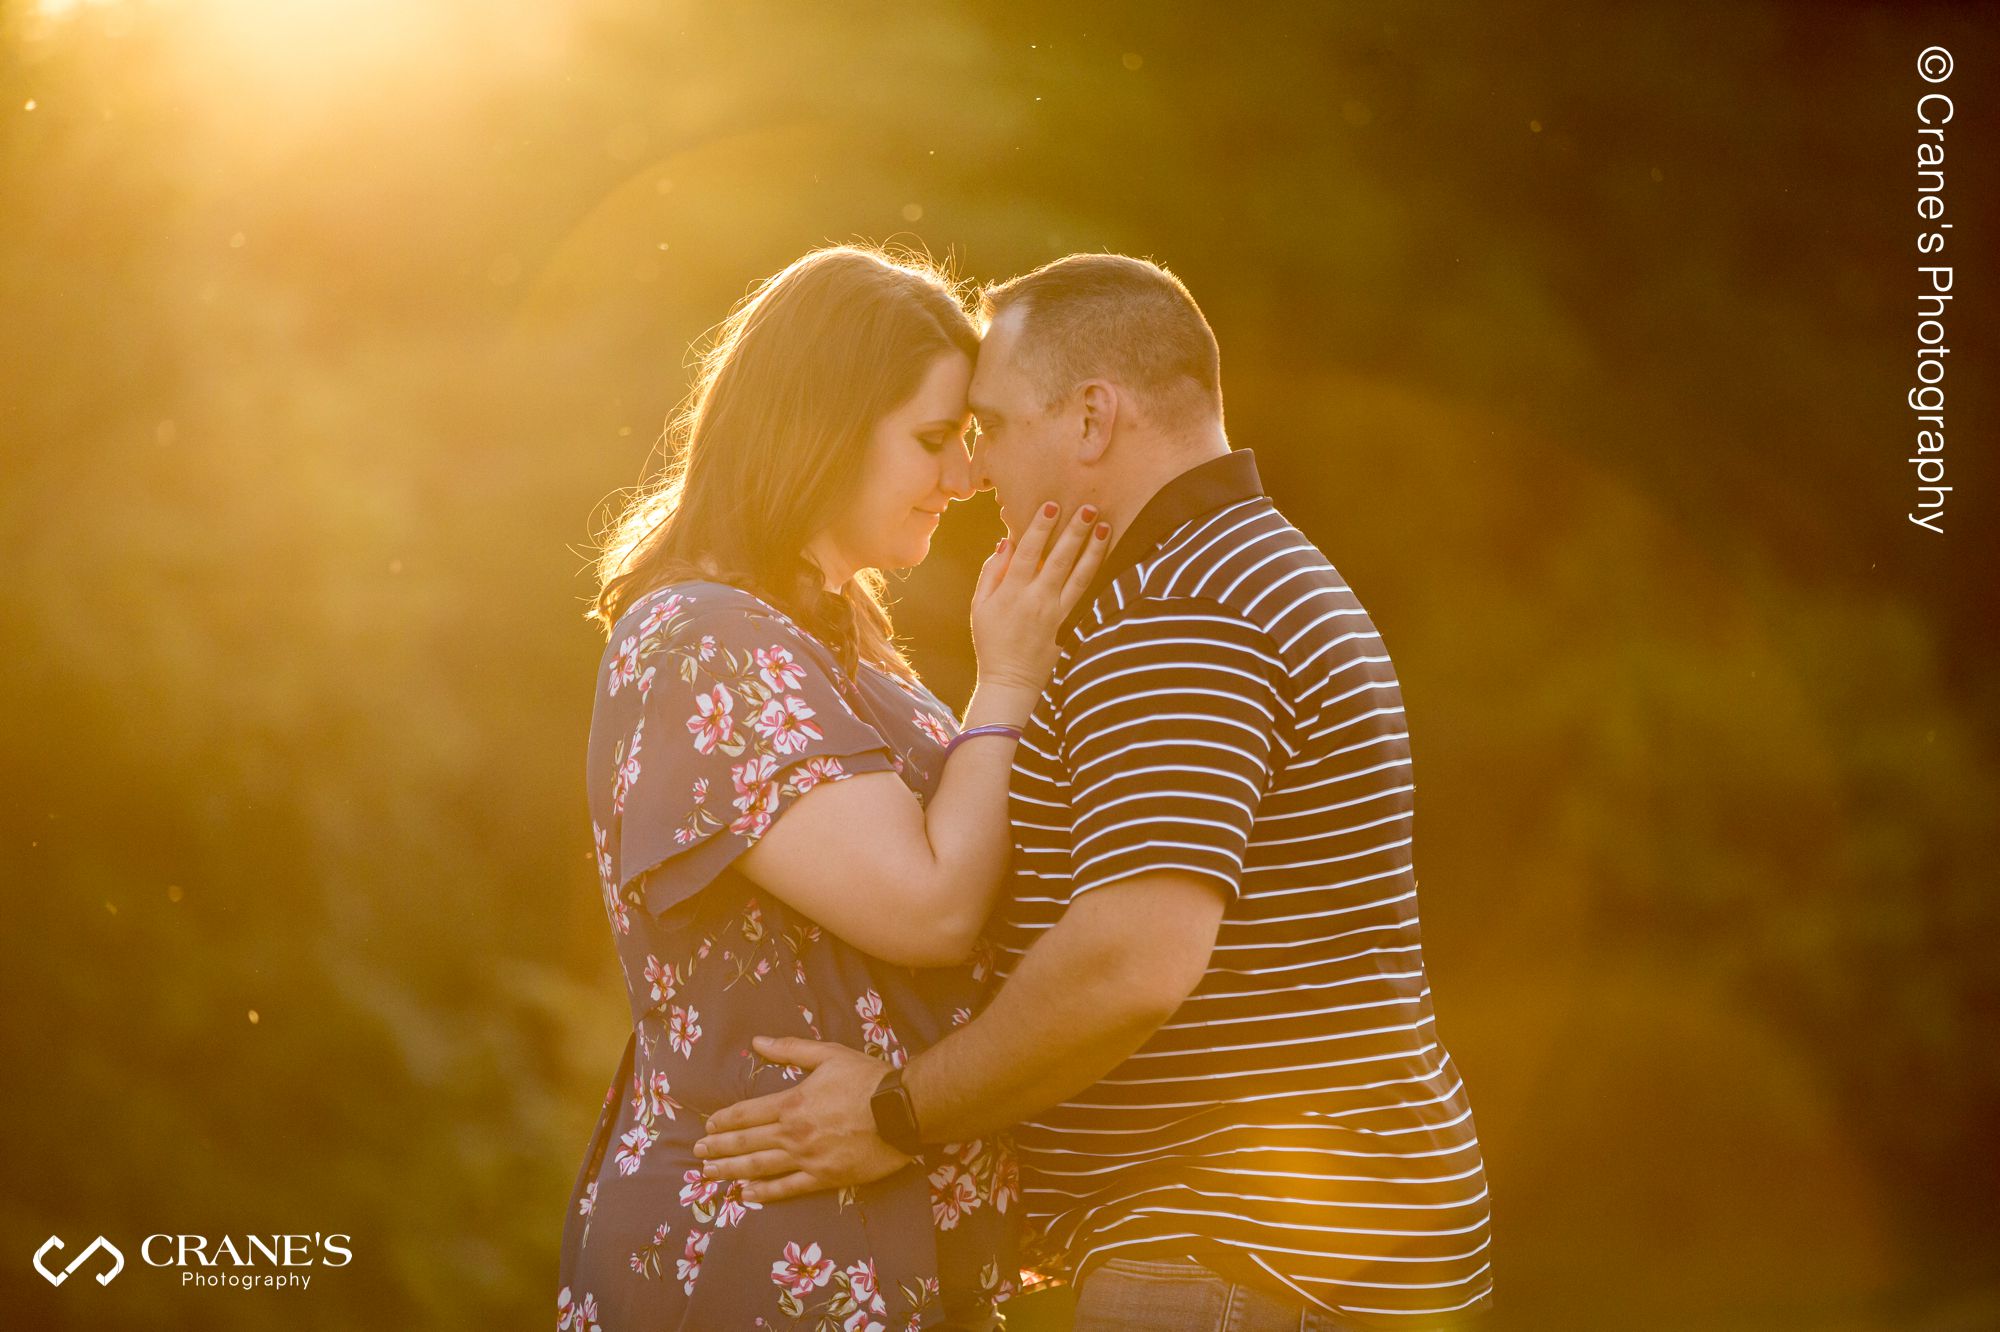 An engagement session photo of a couple at sunset at the Naperville Riverwalk